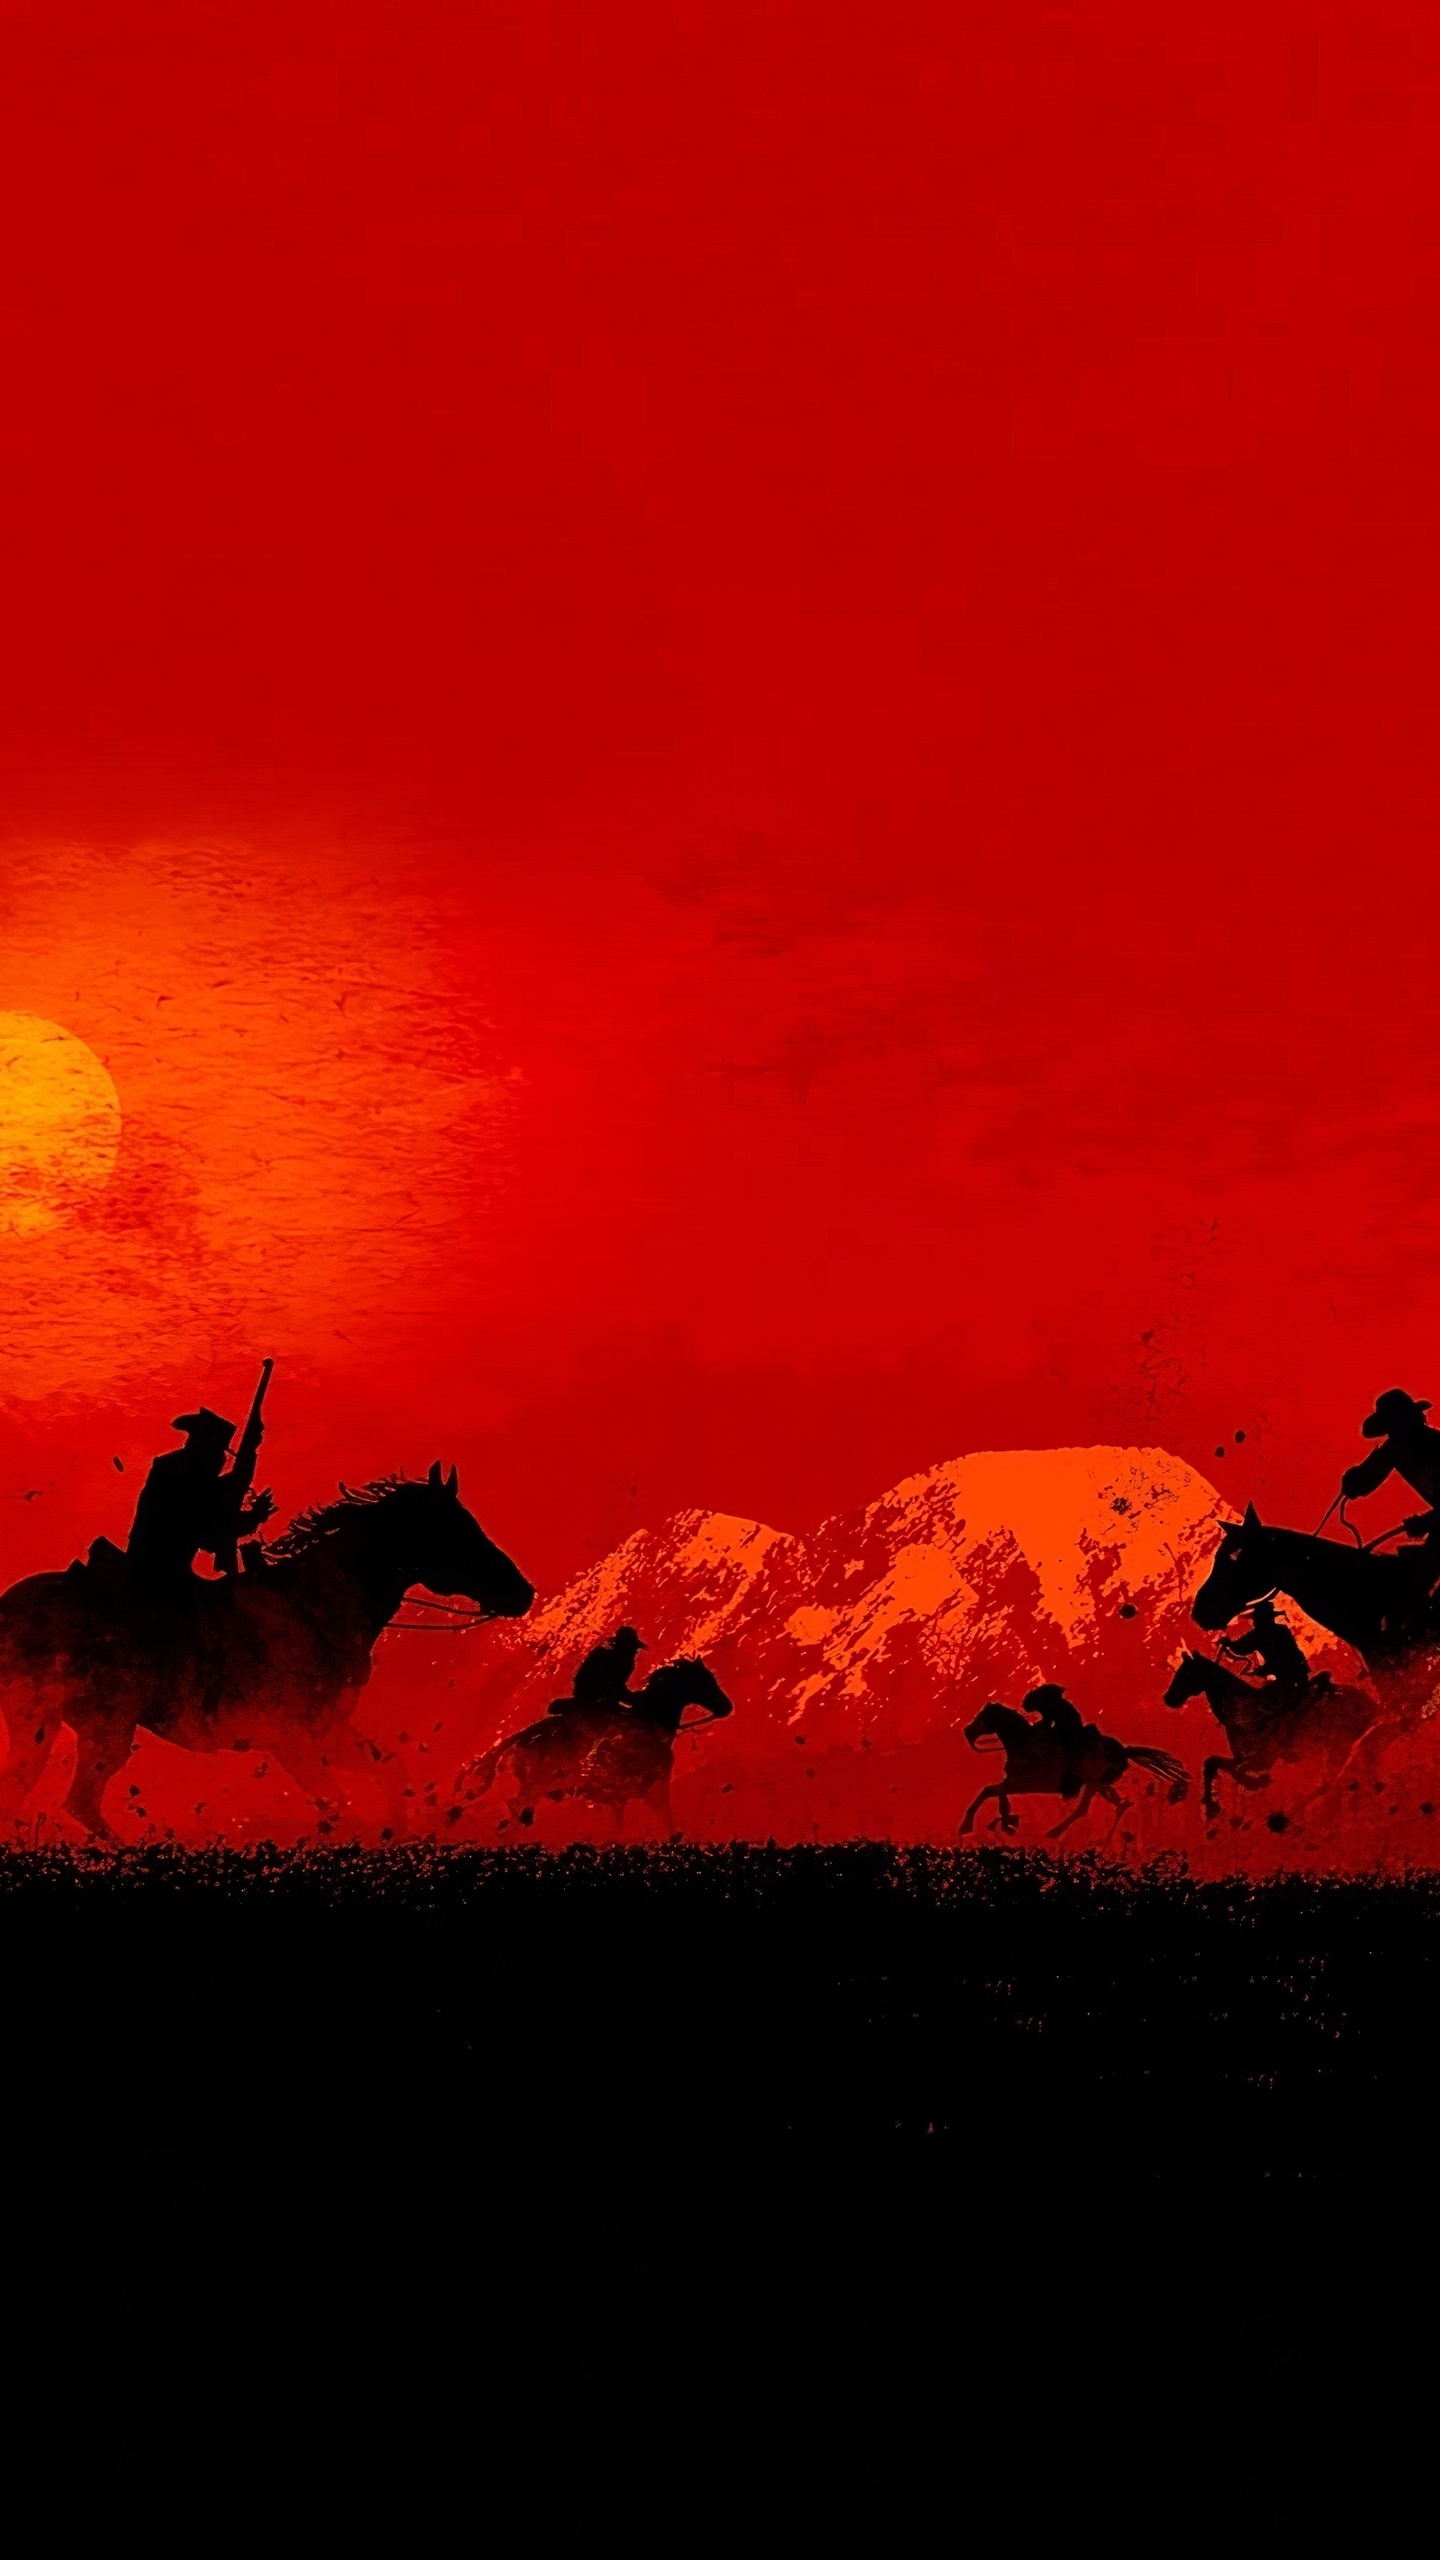 Download 1440x2560 wallpaper red dead redemption 2, cowboys, game, 2019, qhd samsung galaxy s6